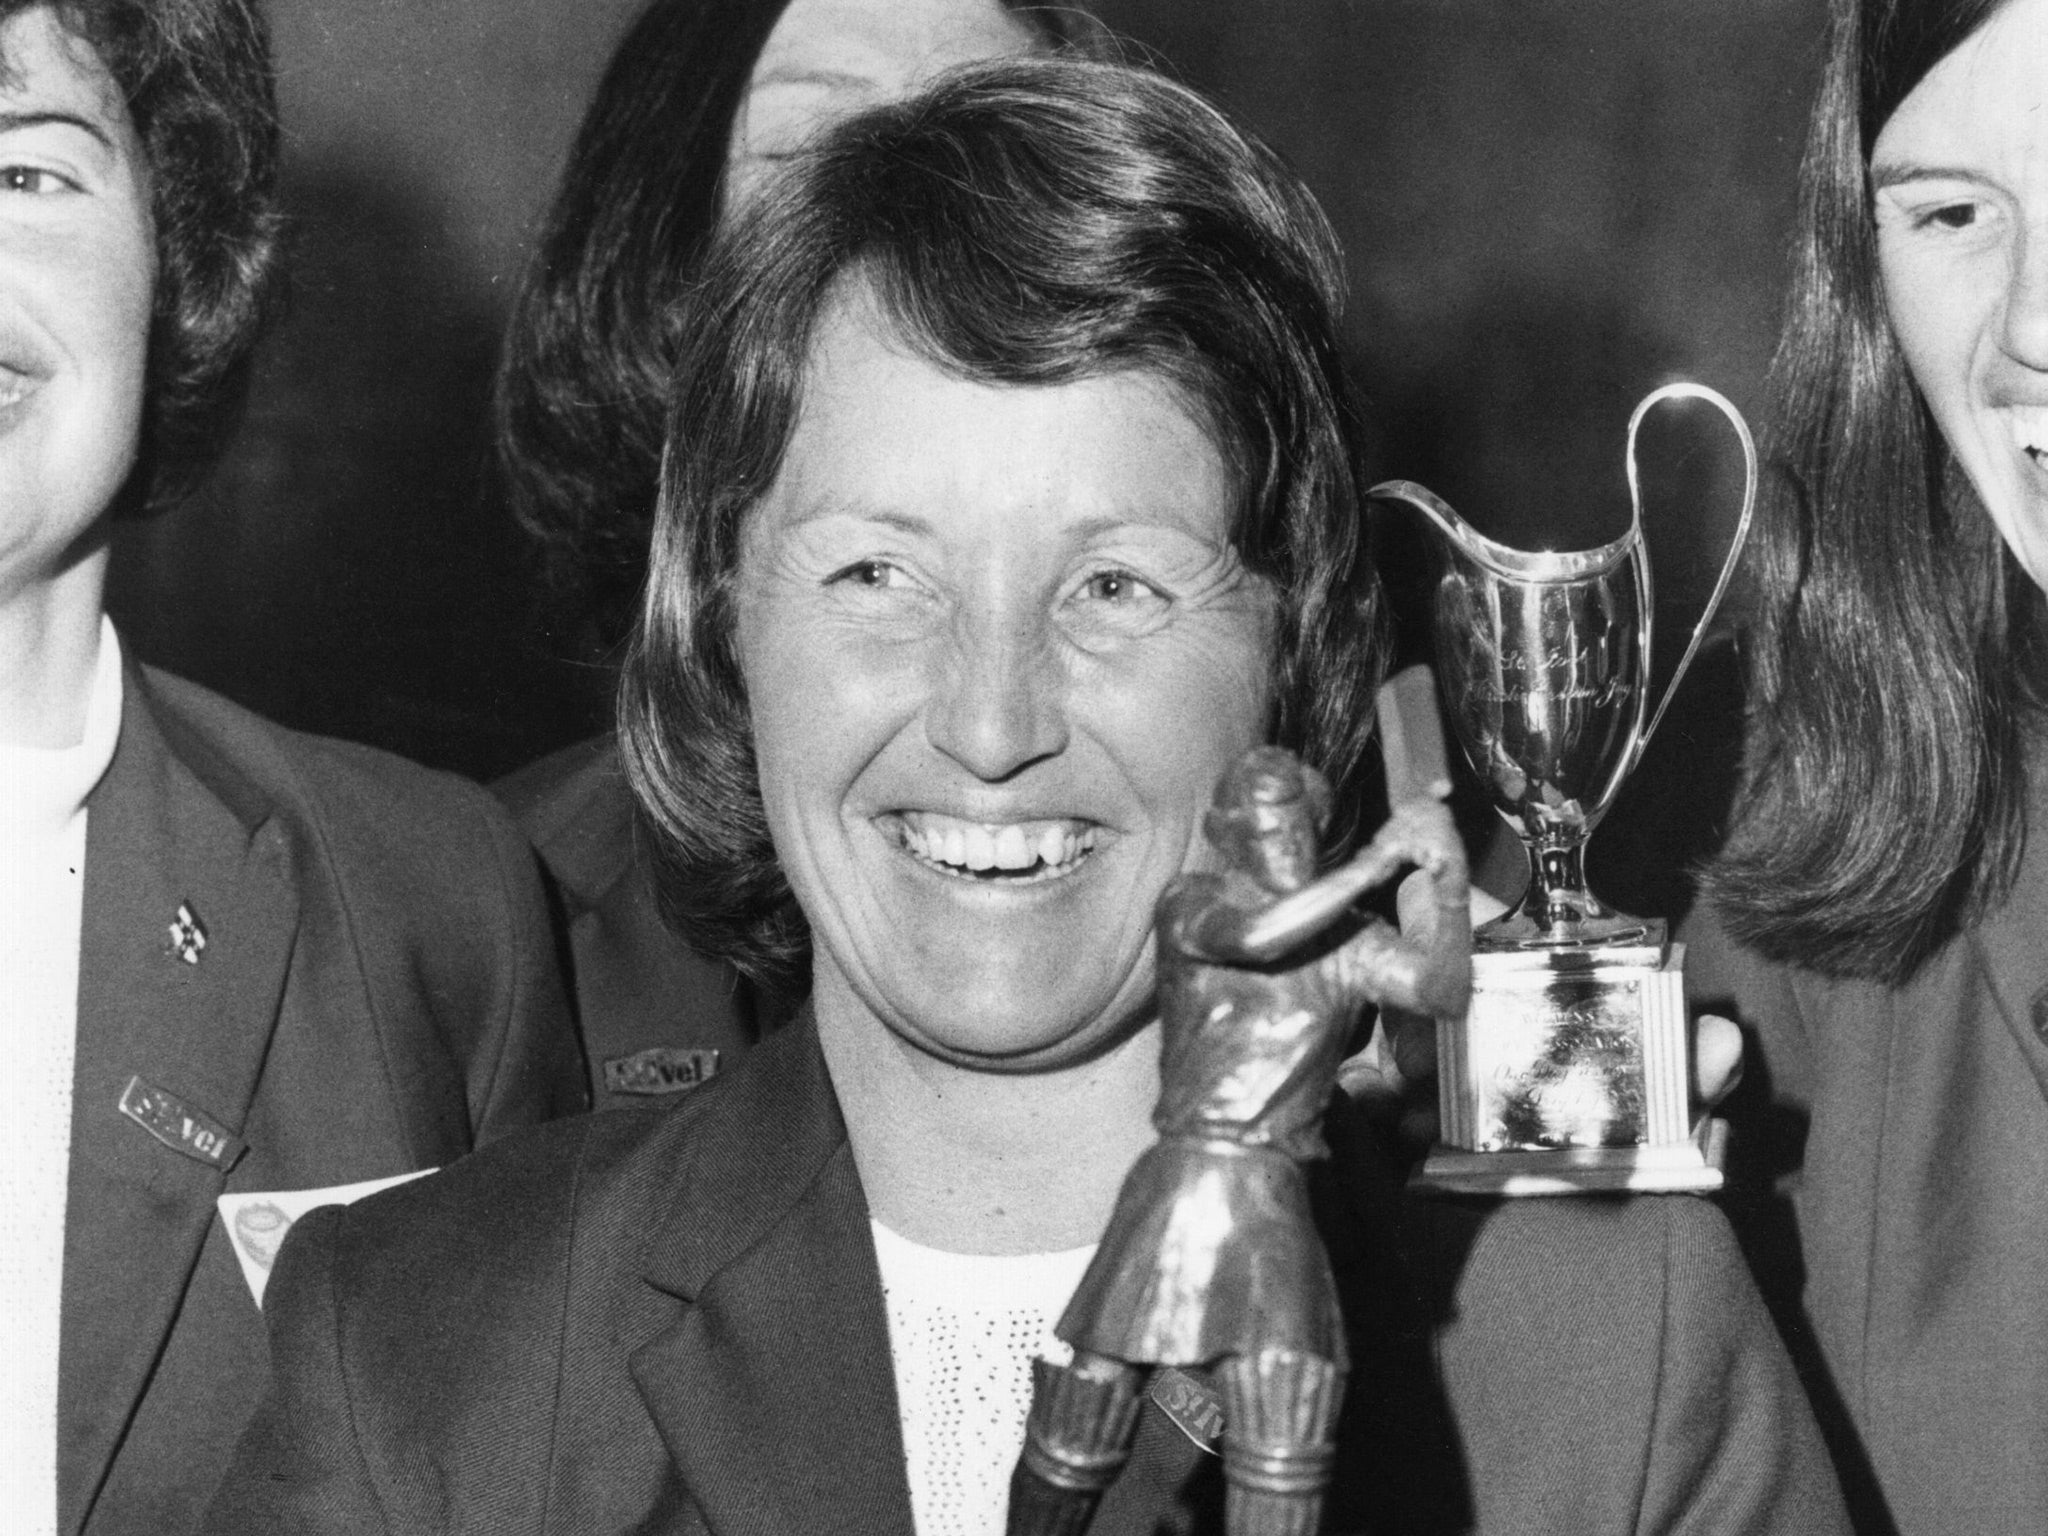 Heyhoe-Flint will be remembered as a pioneer of the women's game